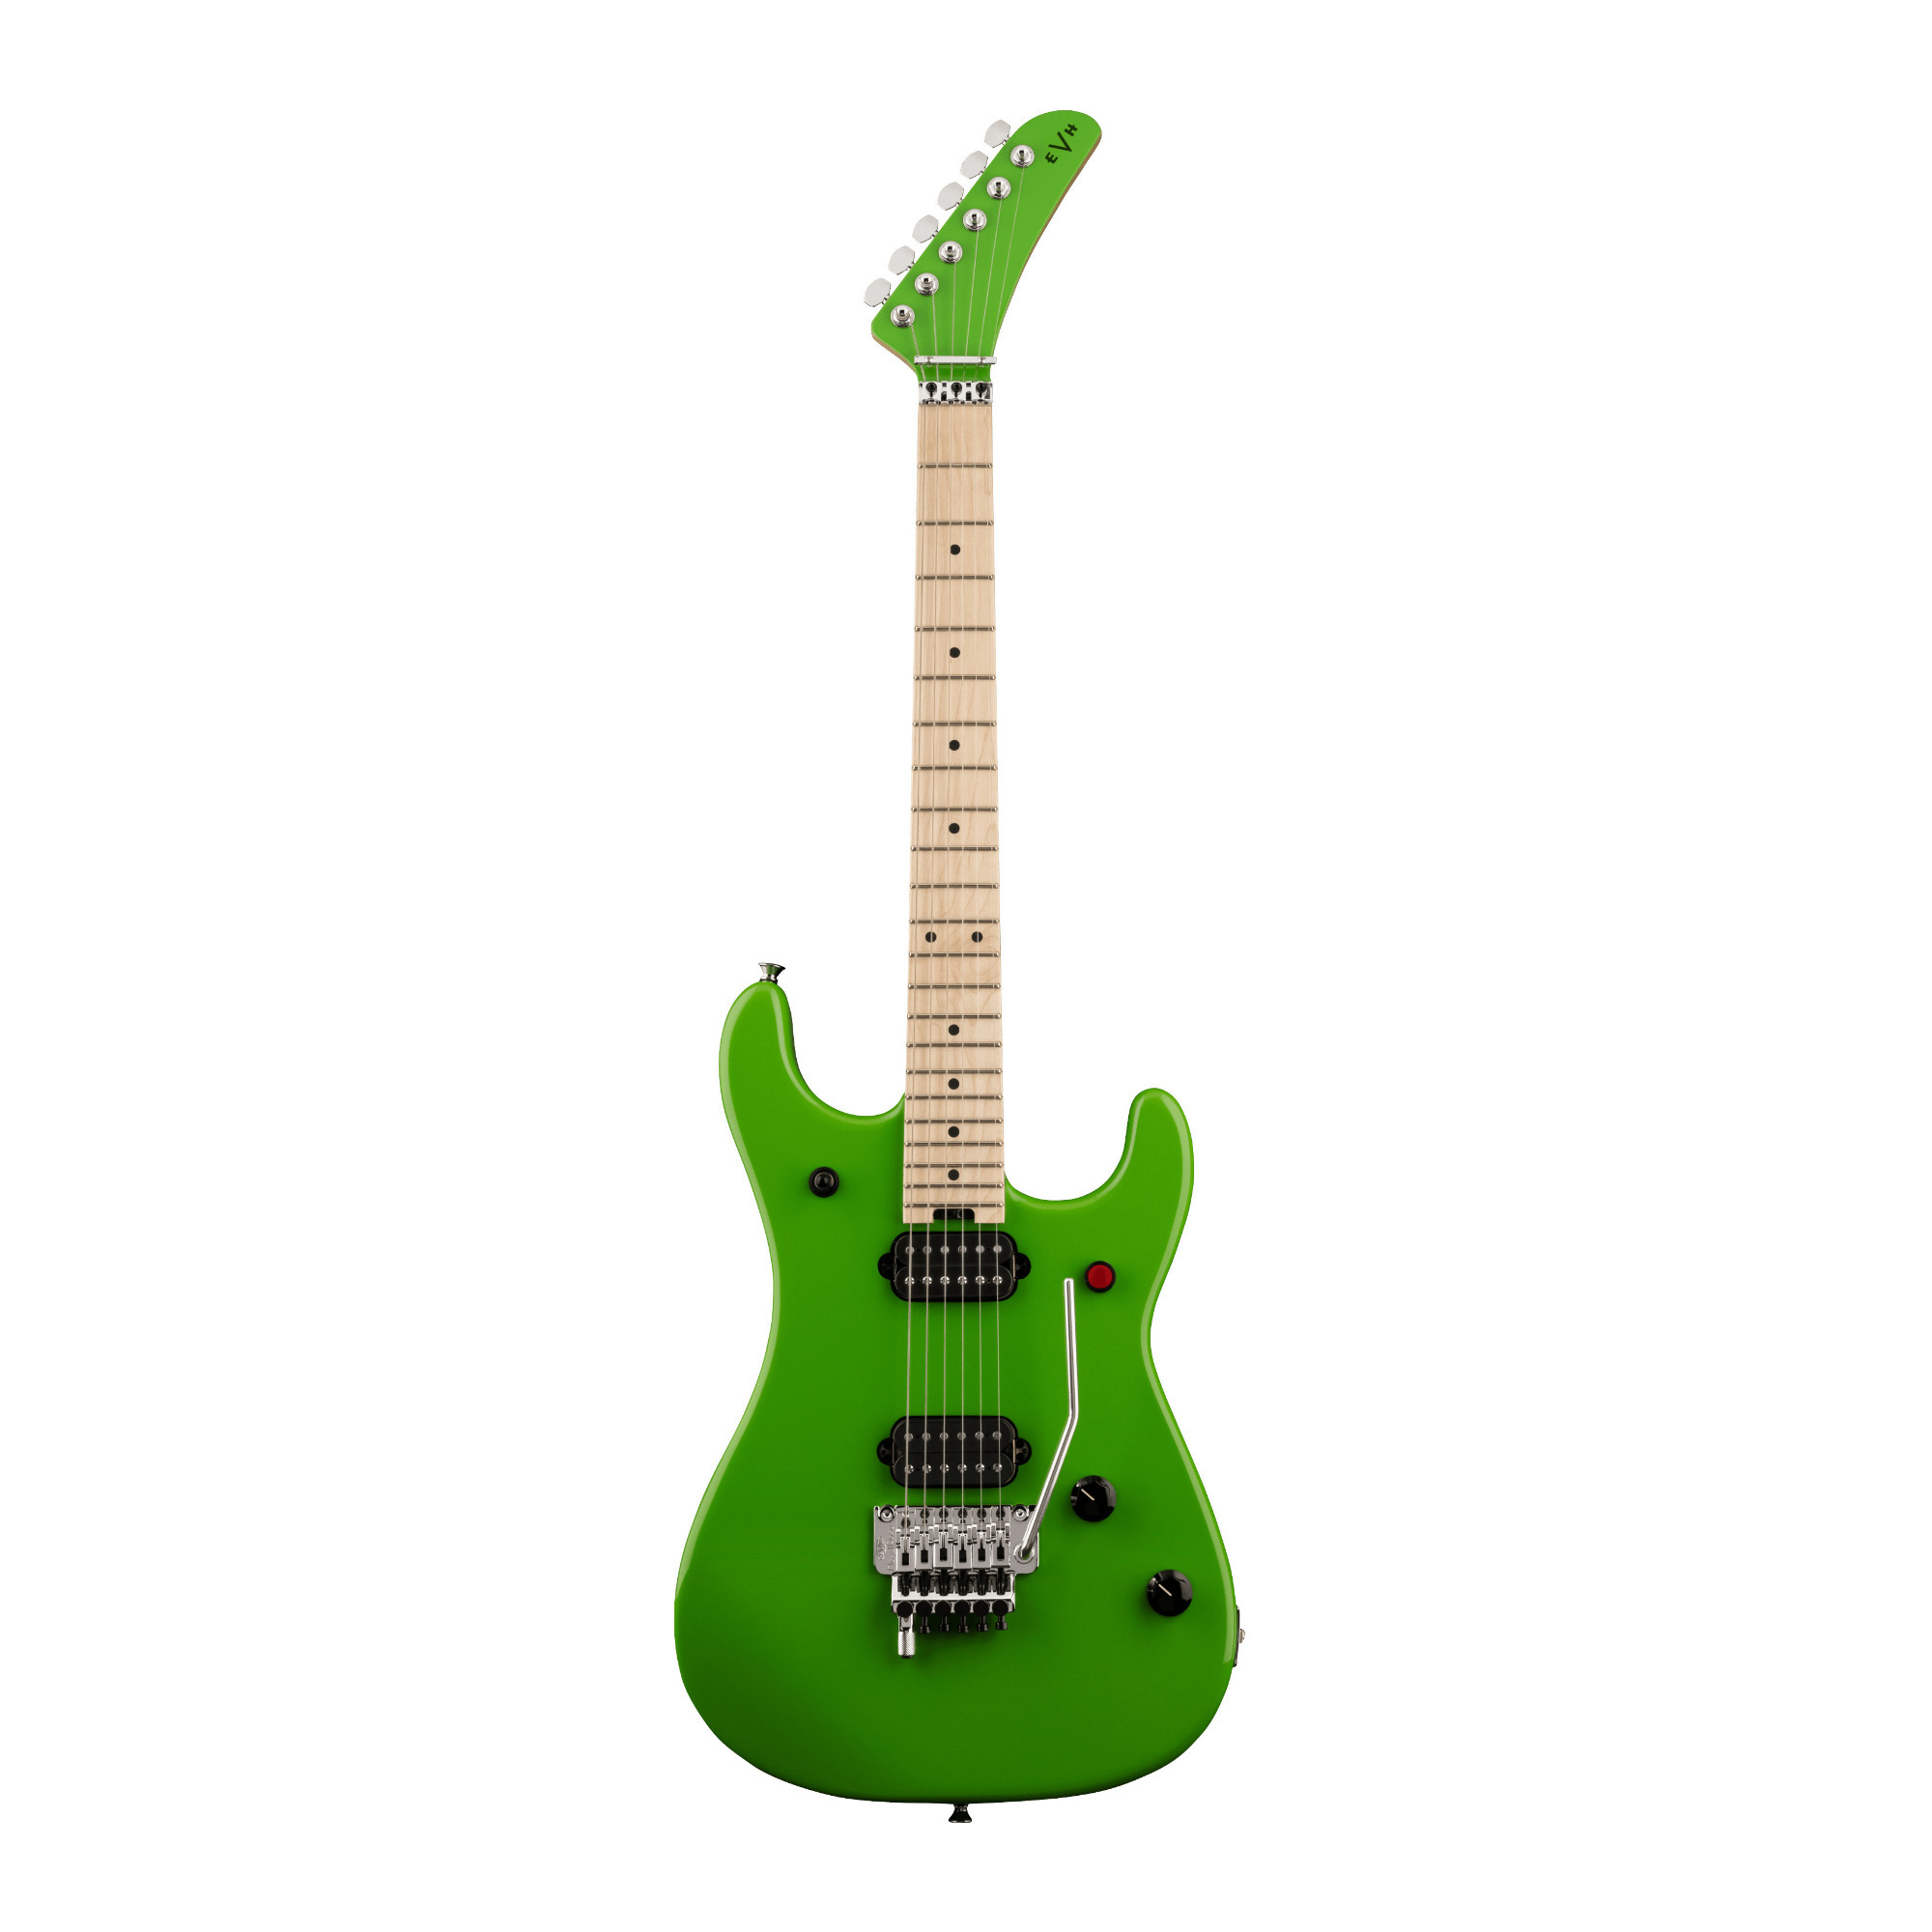 EVH 5150 Standard Series 6-String Electric Guitar with Basswood Body (Right-Handed, Slime Green) -  5108001525